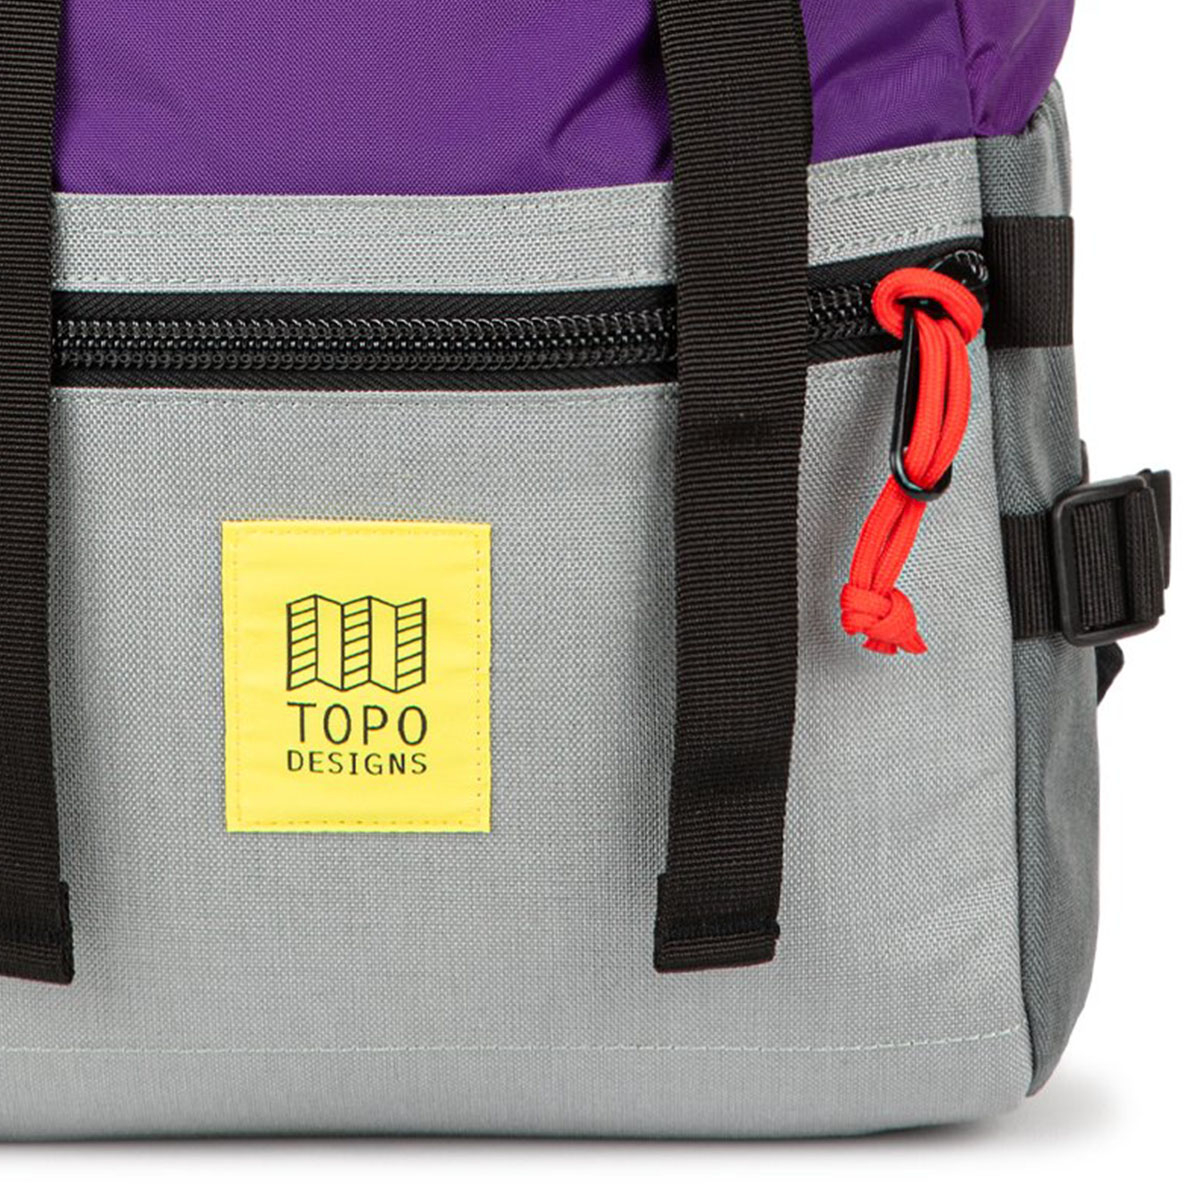 Topo Designs Rover Pack Classic Purple/Silver/Turquoise, timeless backpack with great functionalities